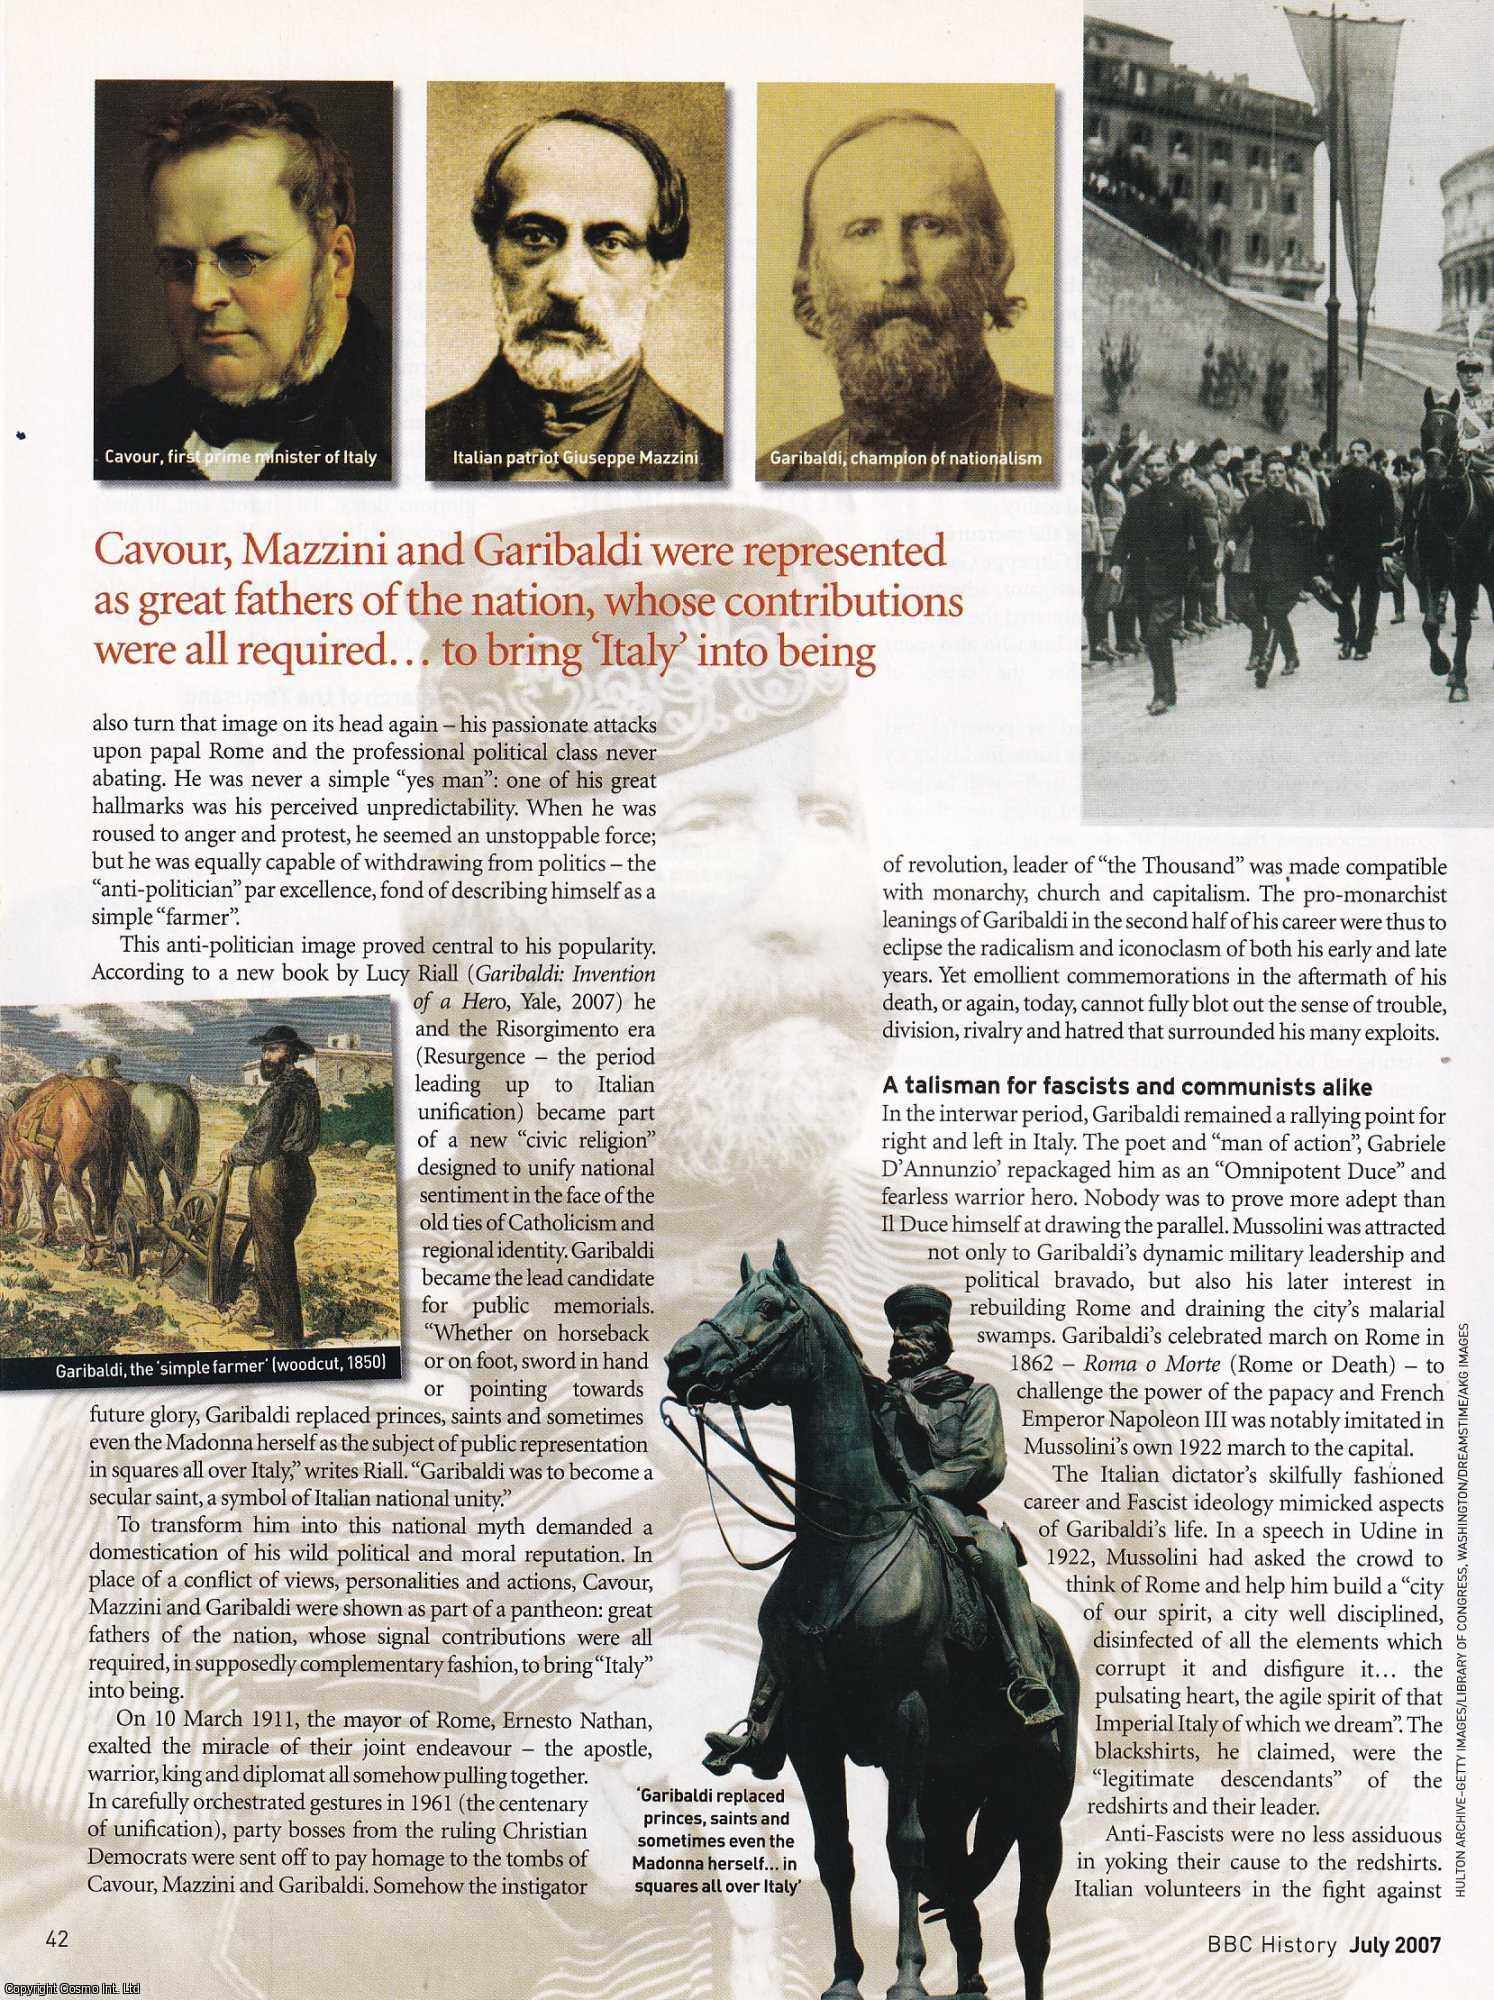 Daniel Pick and Tristram Hunt - Glorious Garibaldi: The Complex Legacy of a Man Who Unified Italy. An original article from BBC History Magazine, 2007.